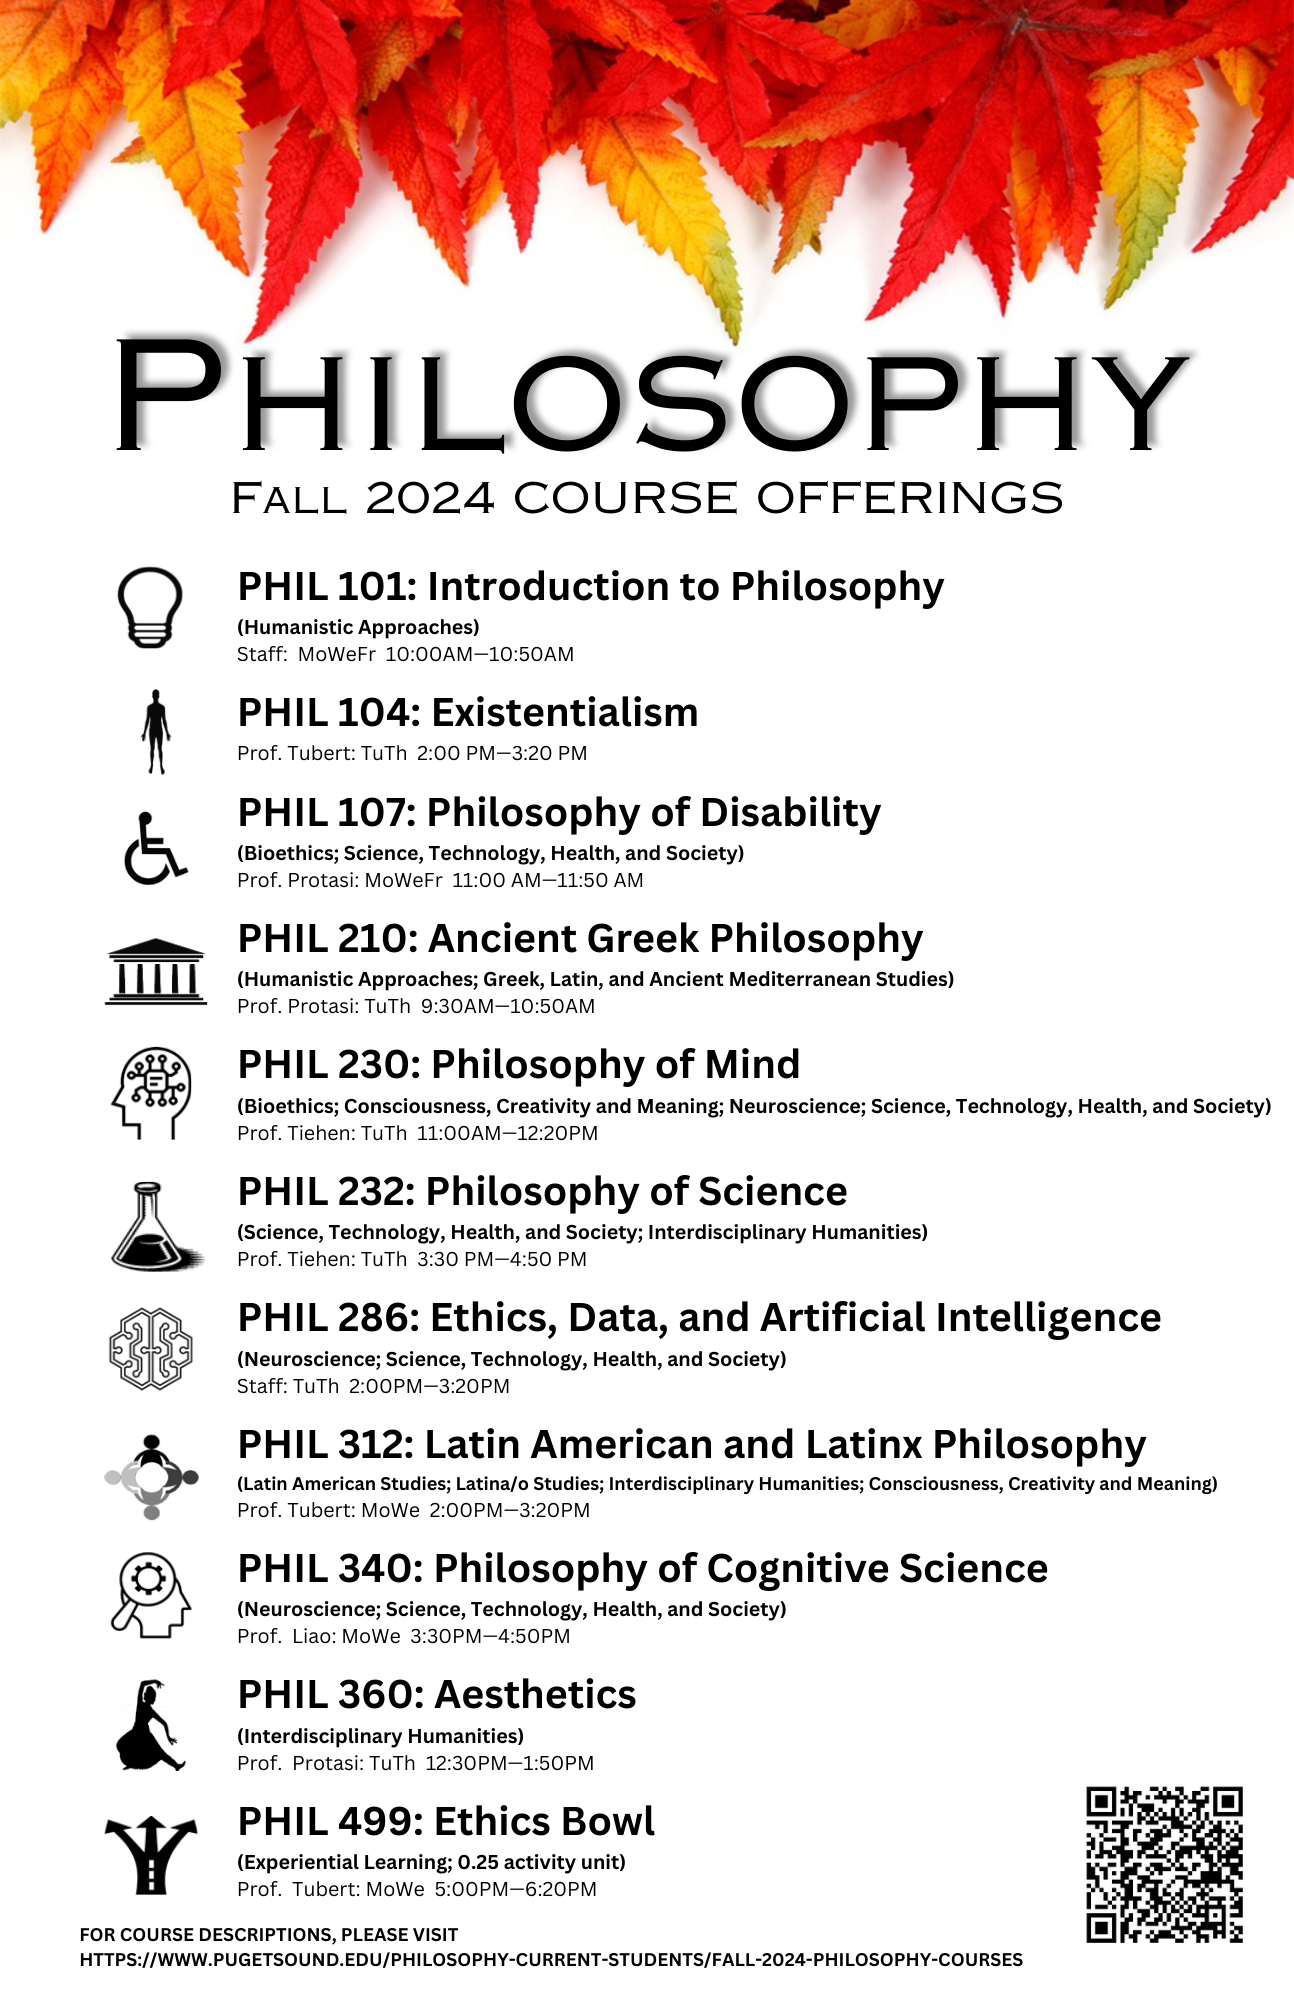 Poster with Fall 2024 Philosophy Course Offerings